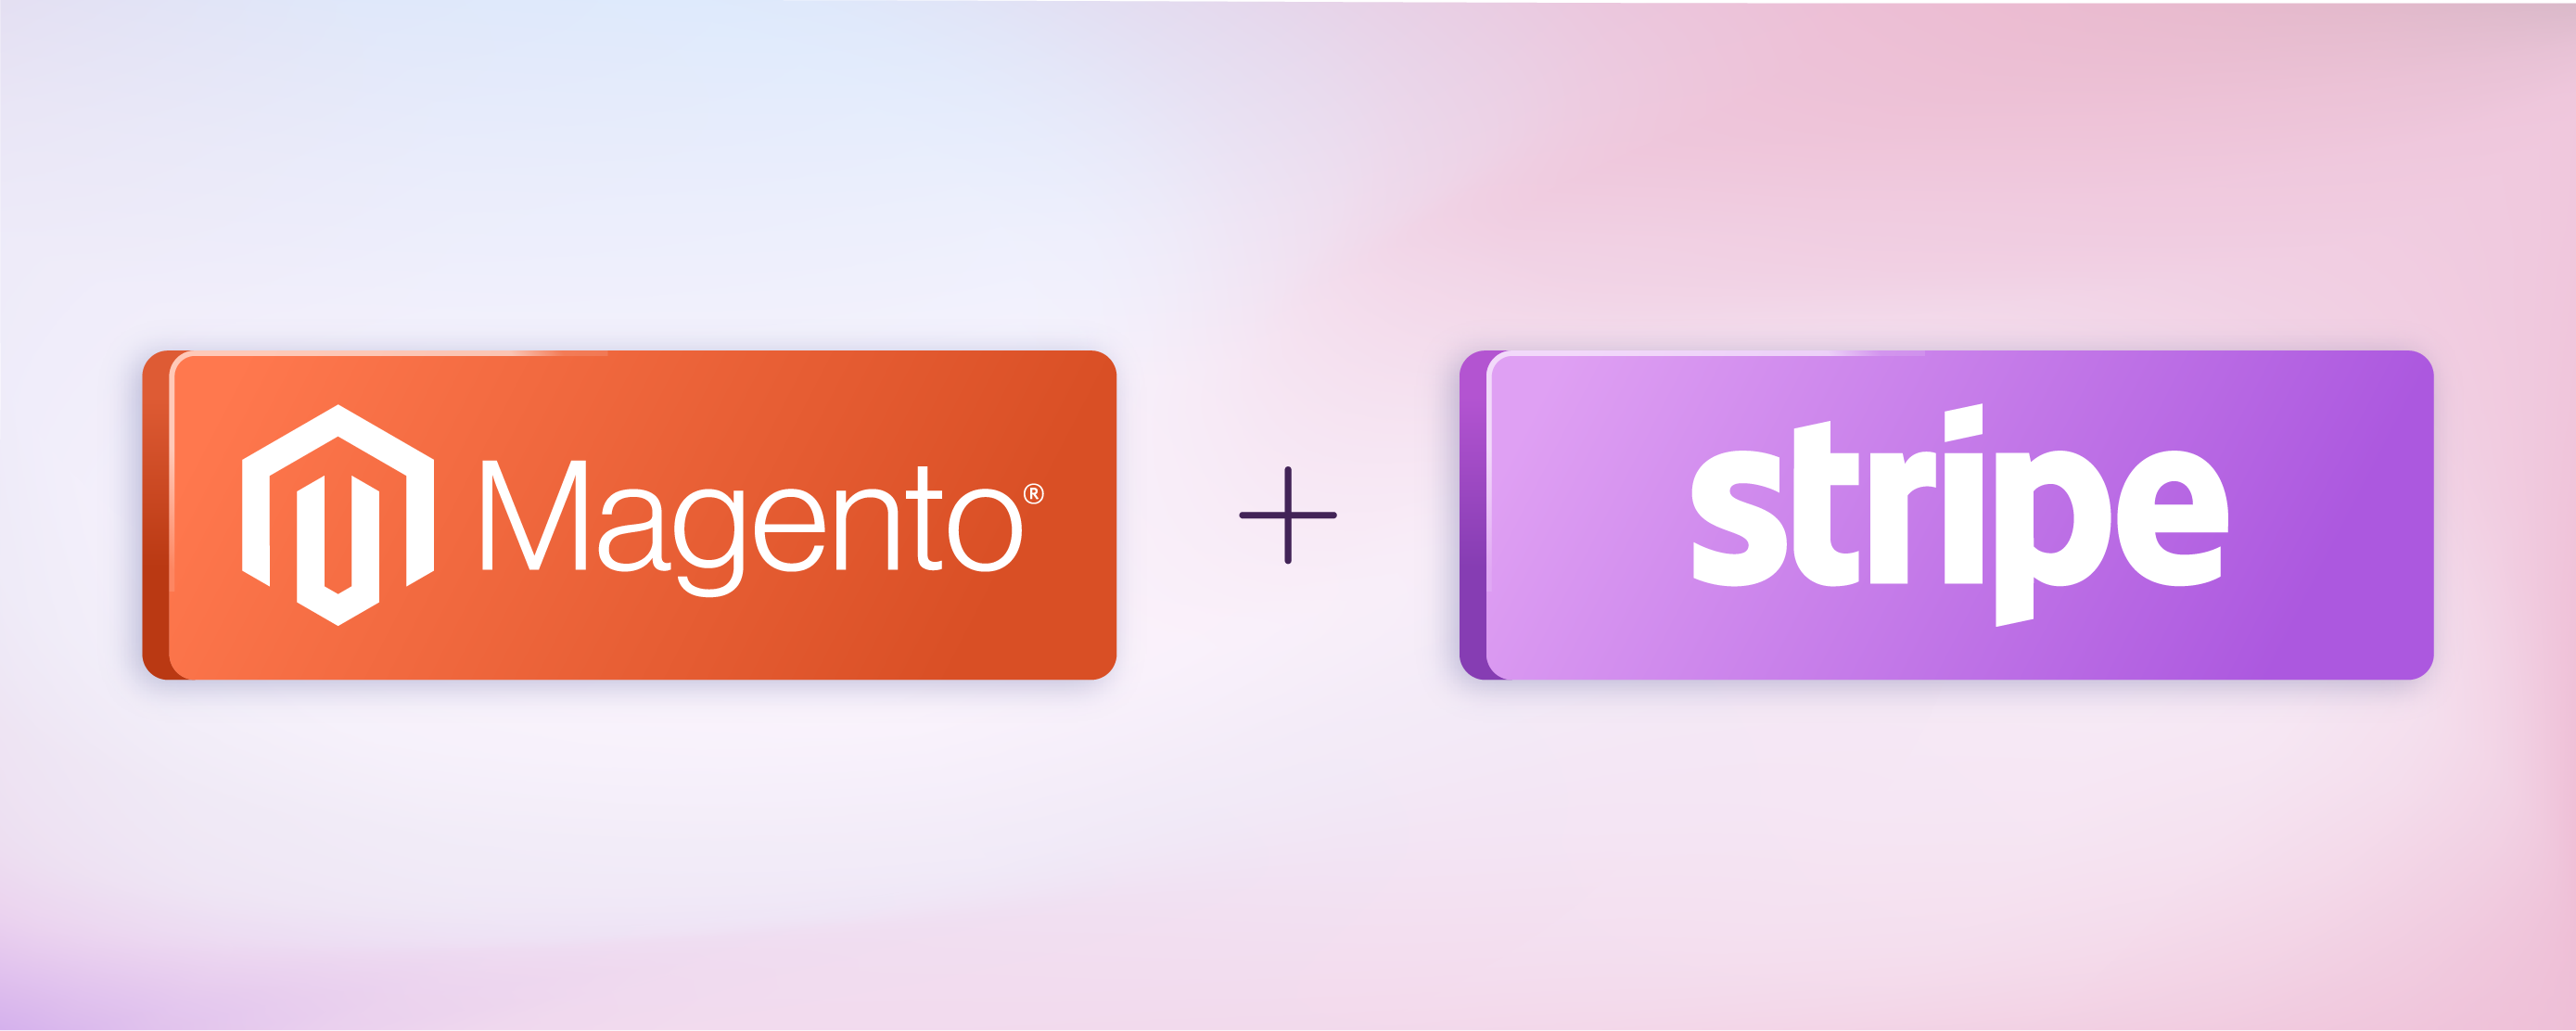 How to Install and Configure Magento 2 Stripe Payment Method?